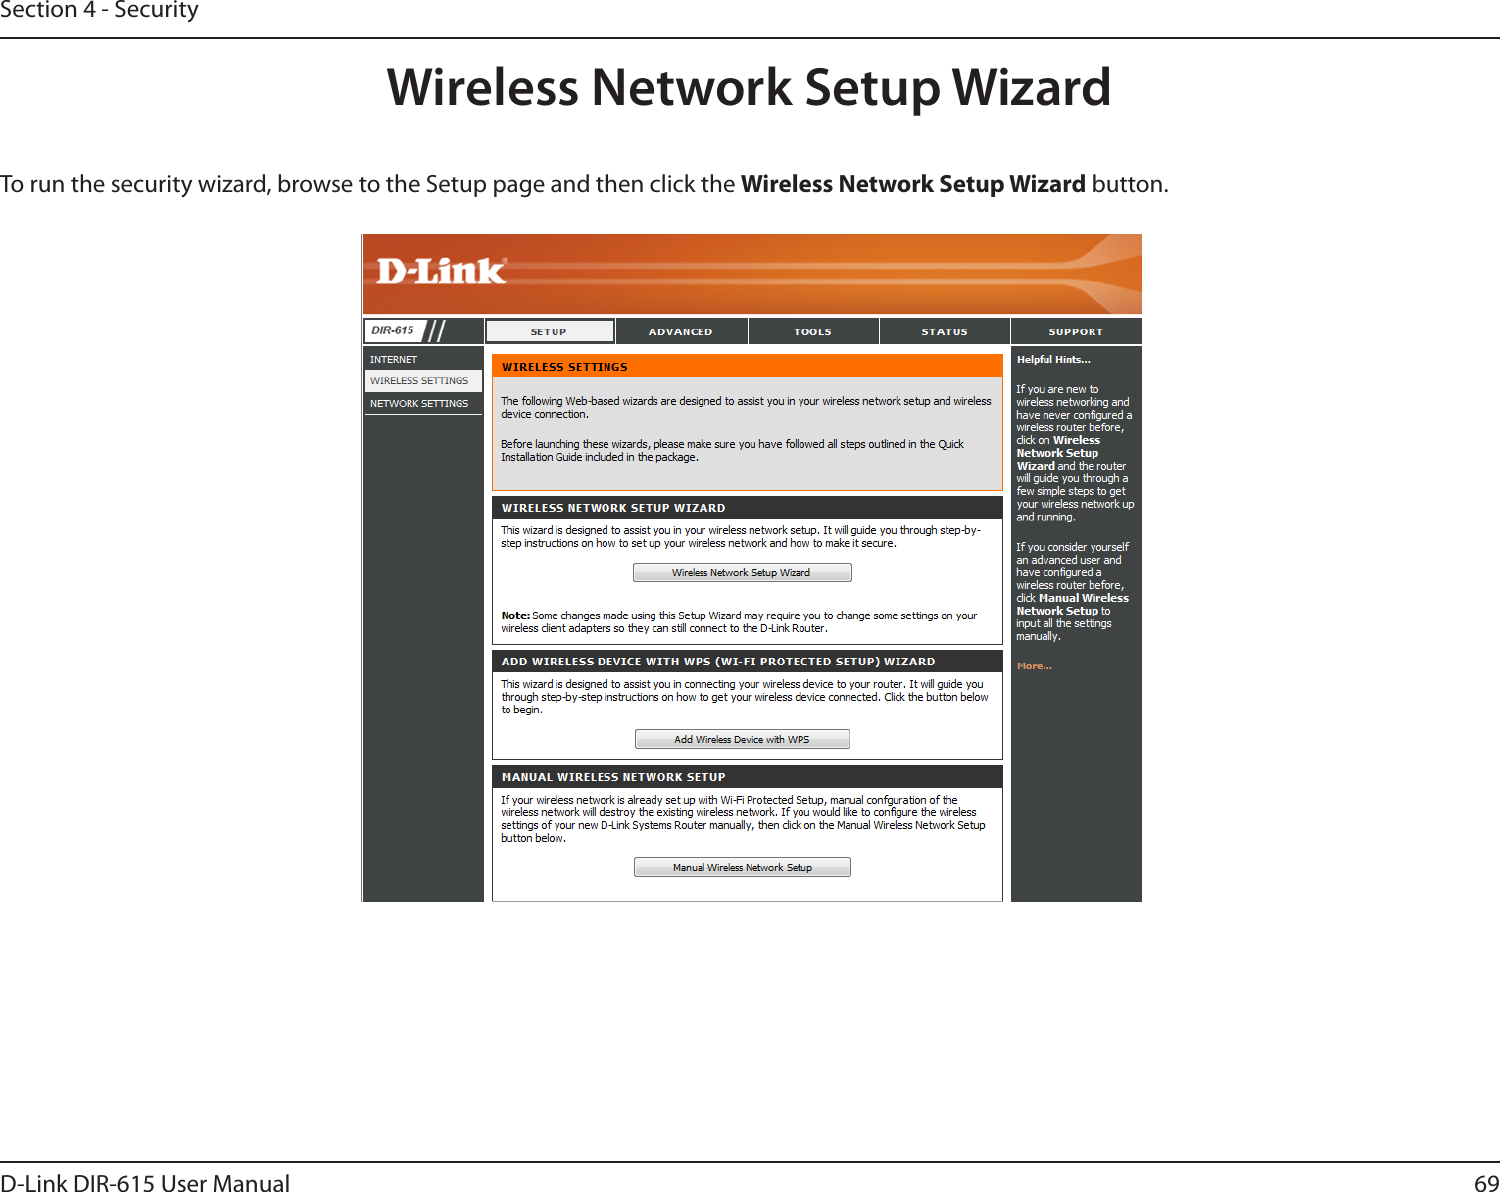 69D-Link DIR-615 User ManualSection 4 - SecurityWireless Network Setup WizardTo run the security wizard, browse to the Setup page and then click the Wireless Network Setup Wizard button. 